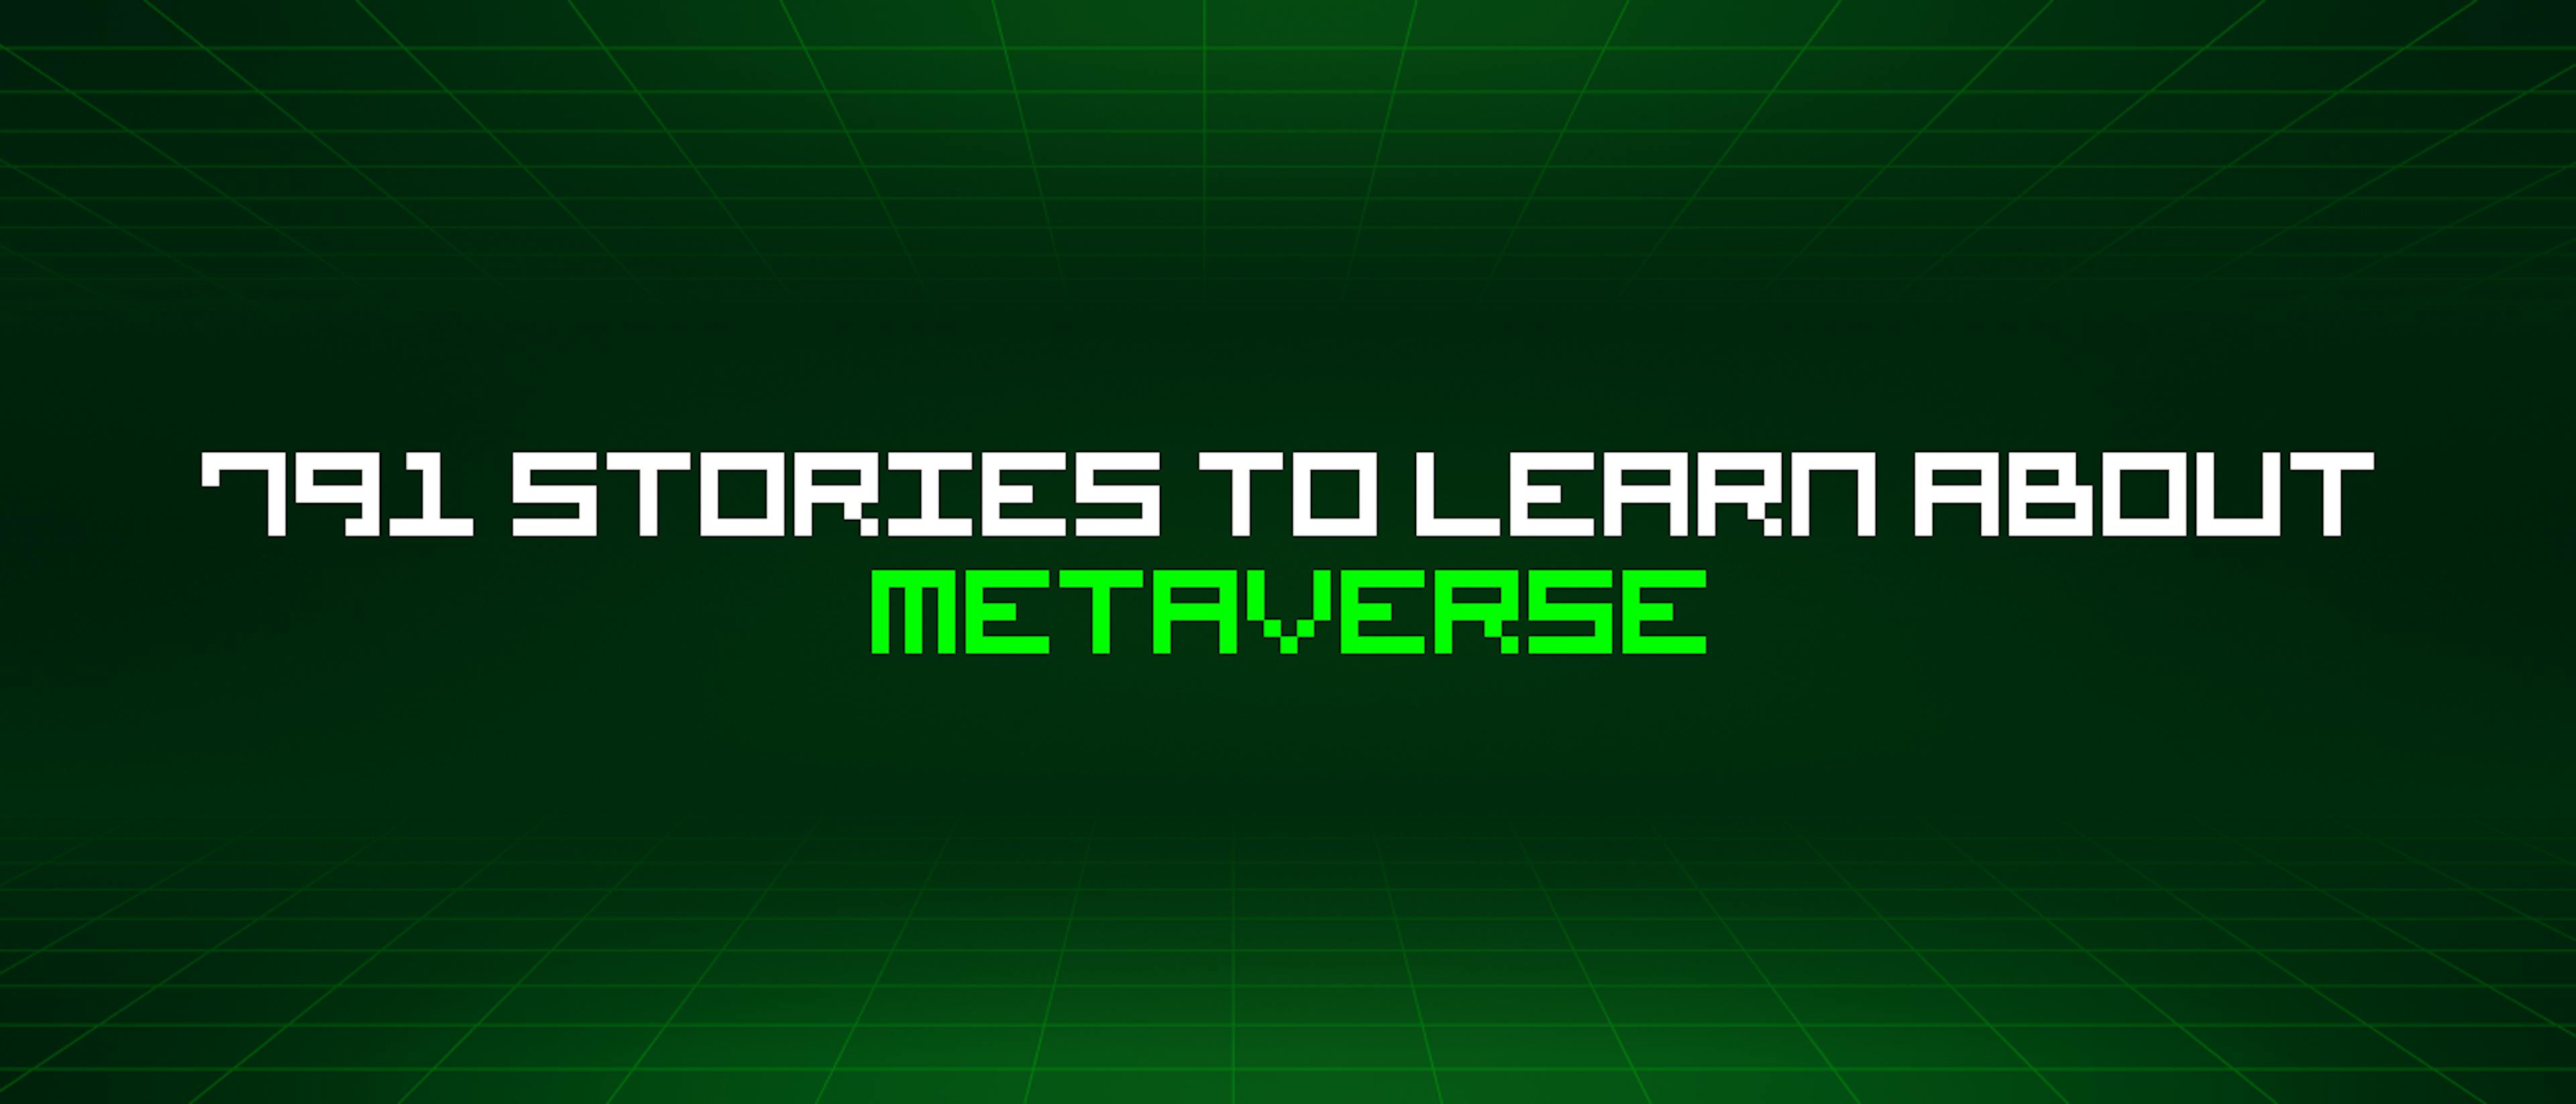 featured image - 791 Stories To Learn About Metaverse